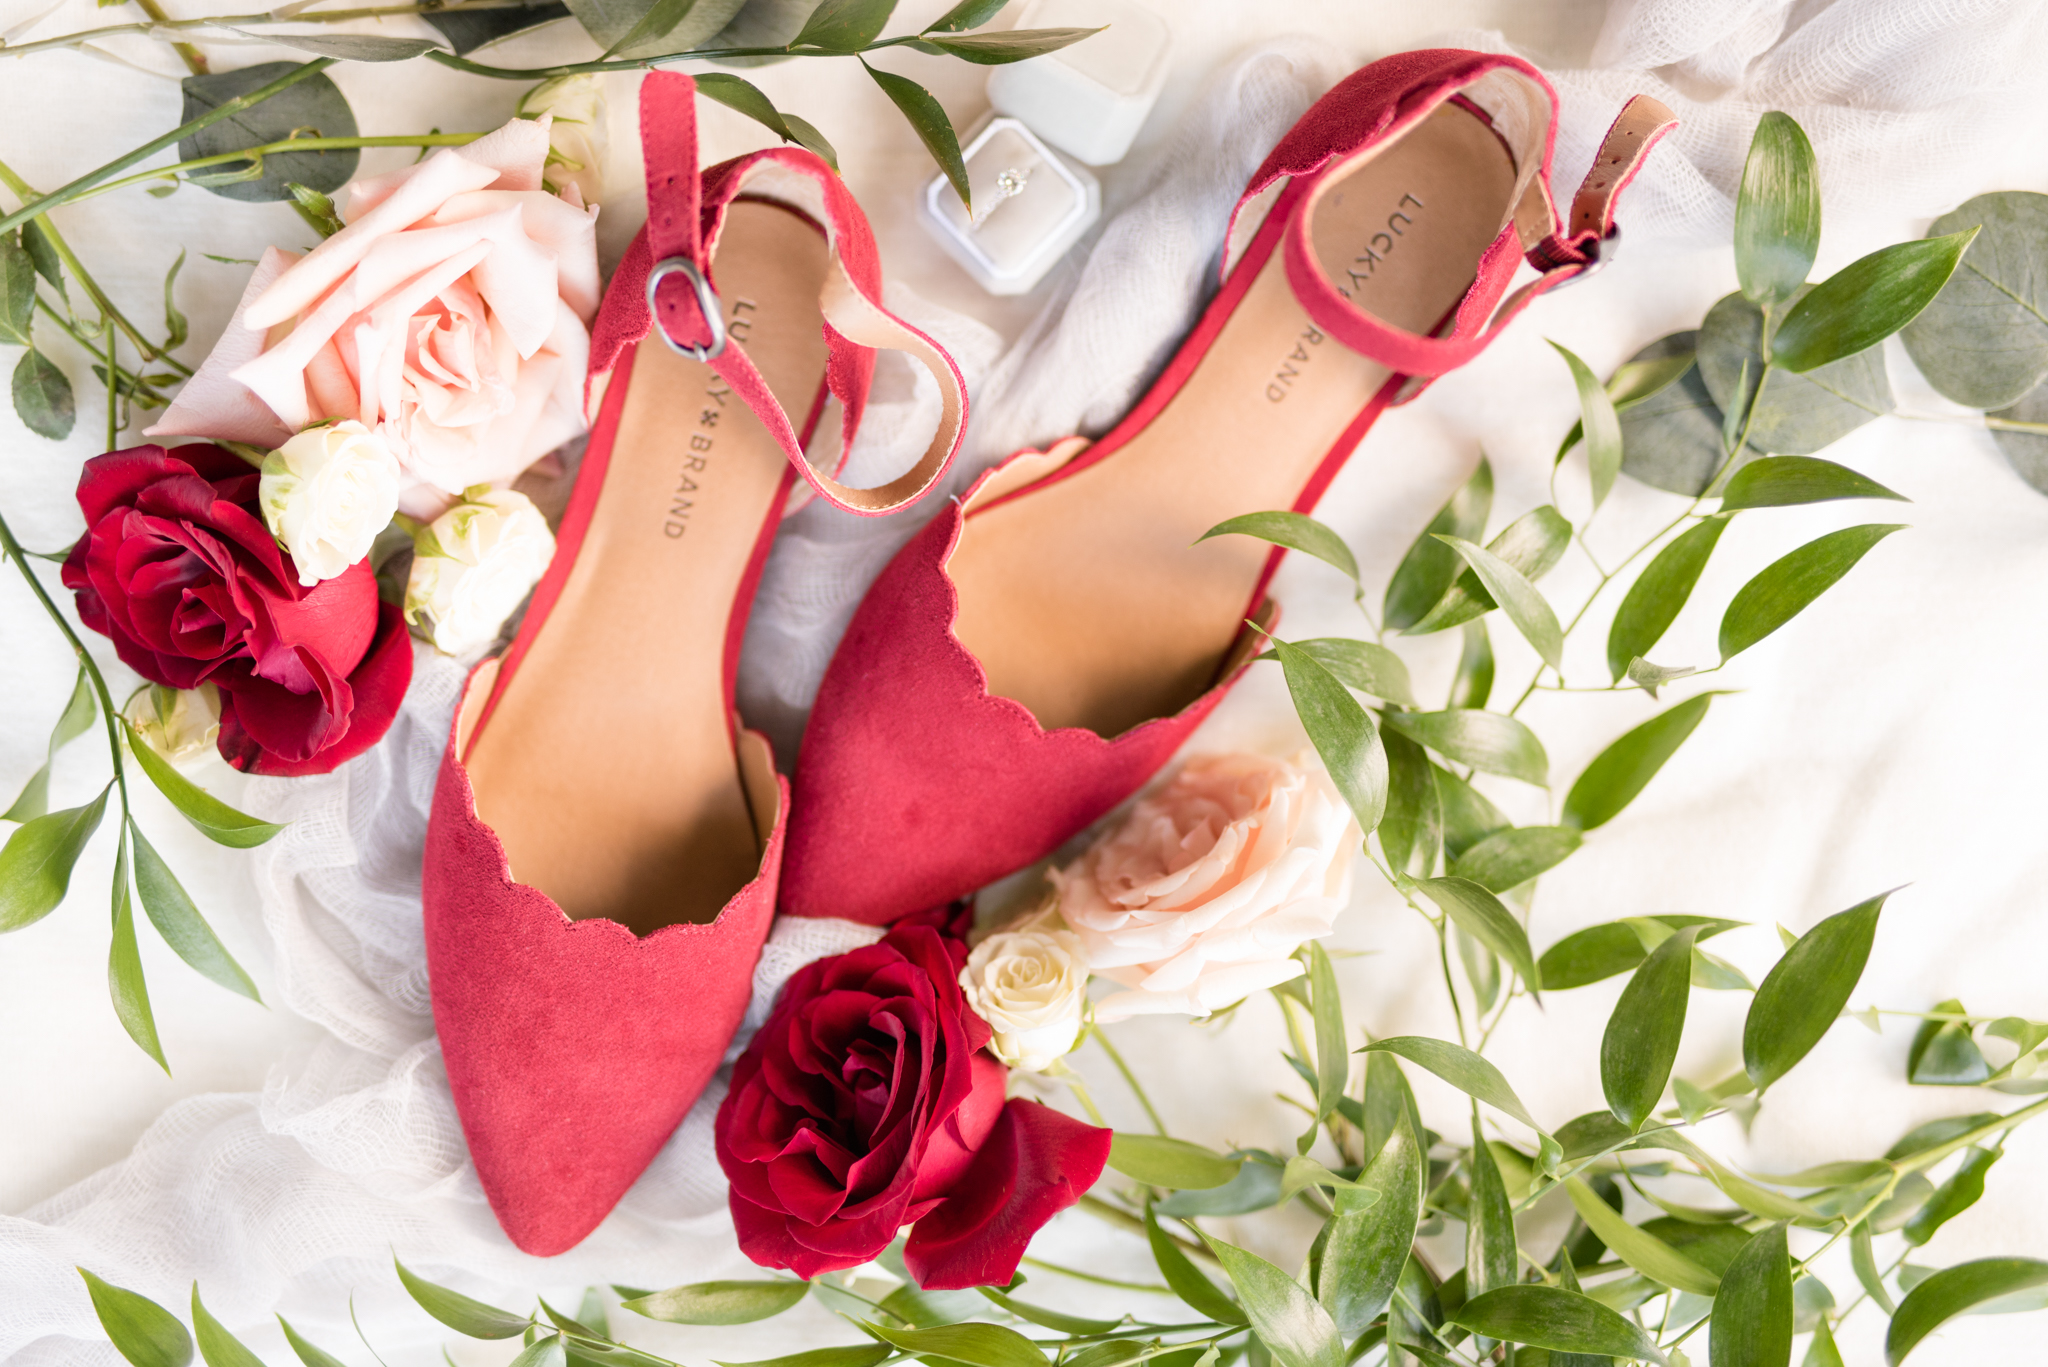 Bridal shoes sit with greenery and flowers.